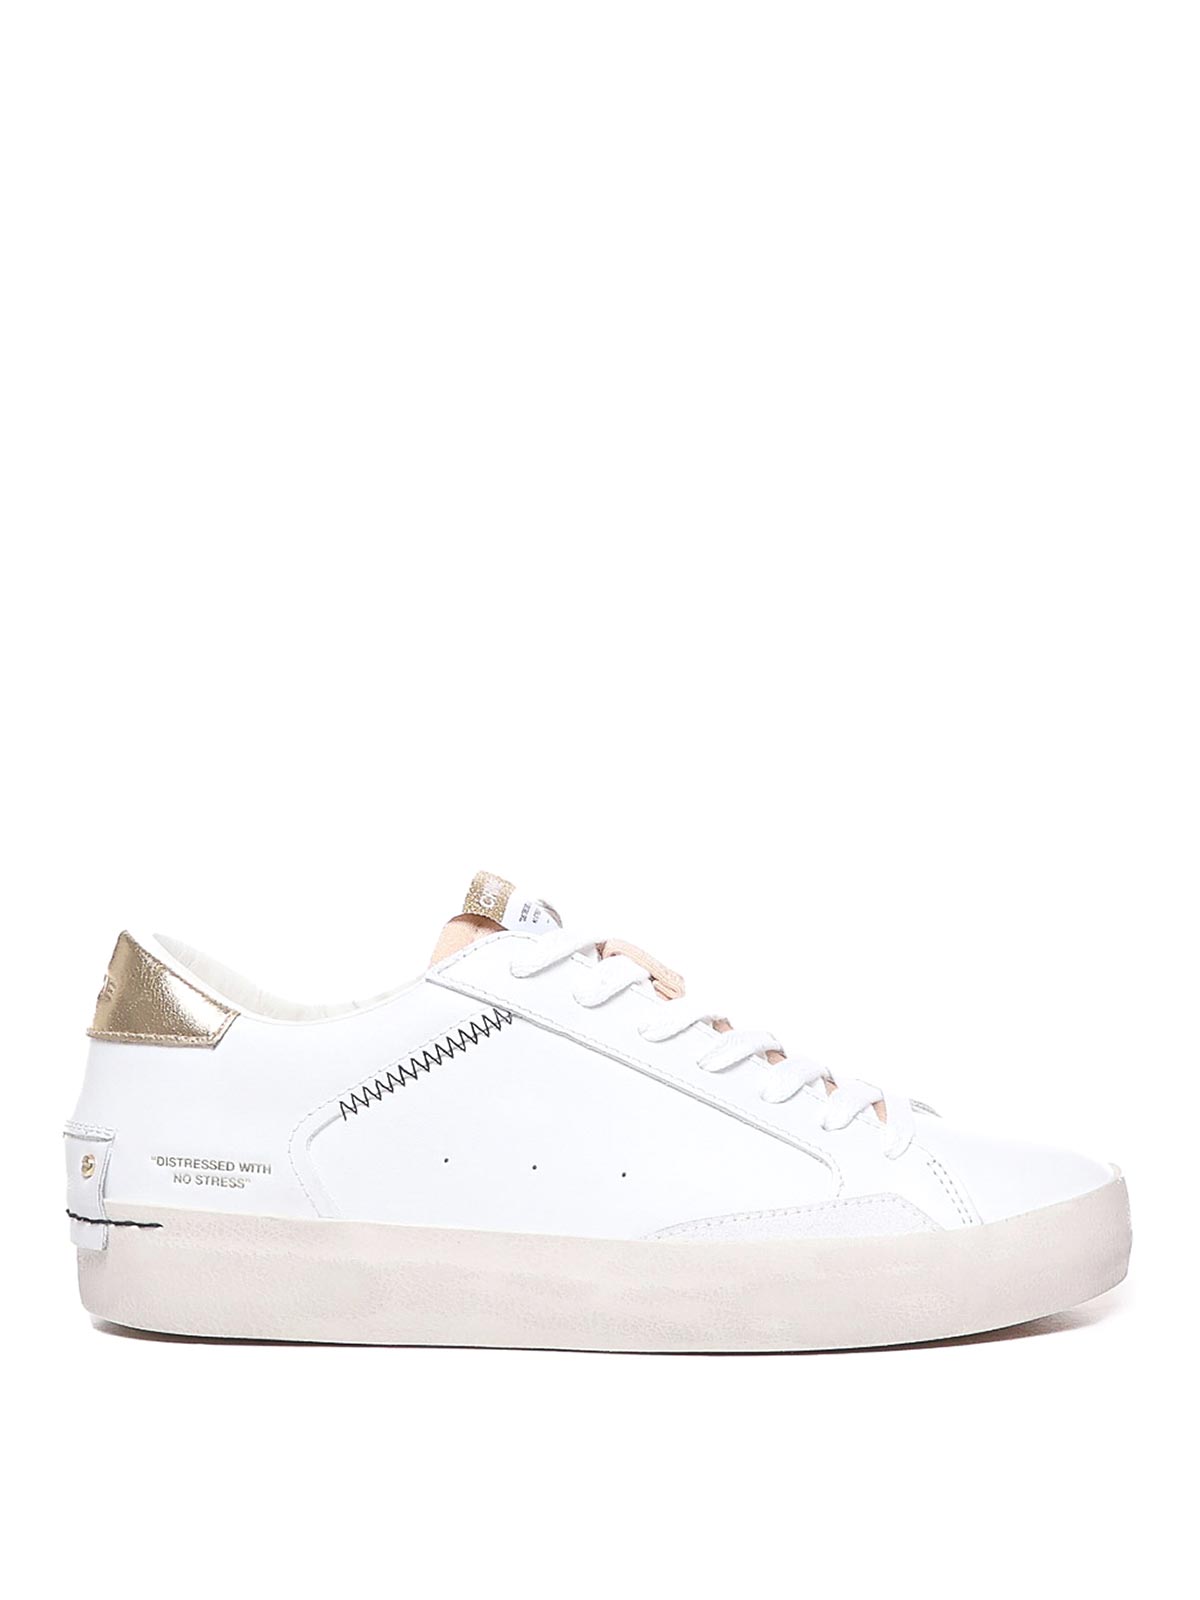 Crime London Distressed Sneakers In White